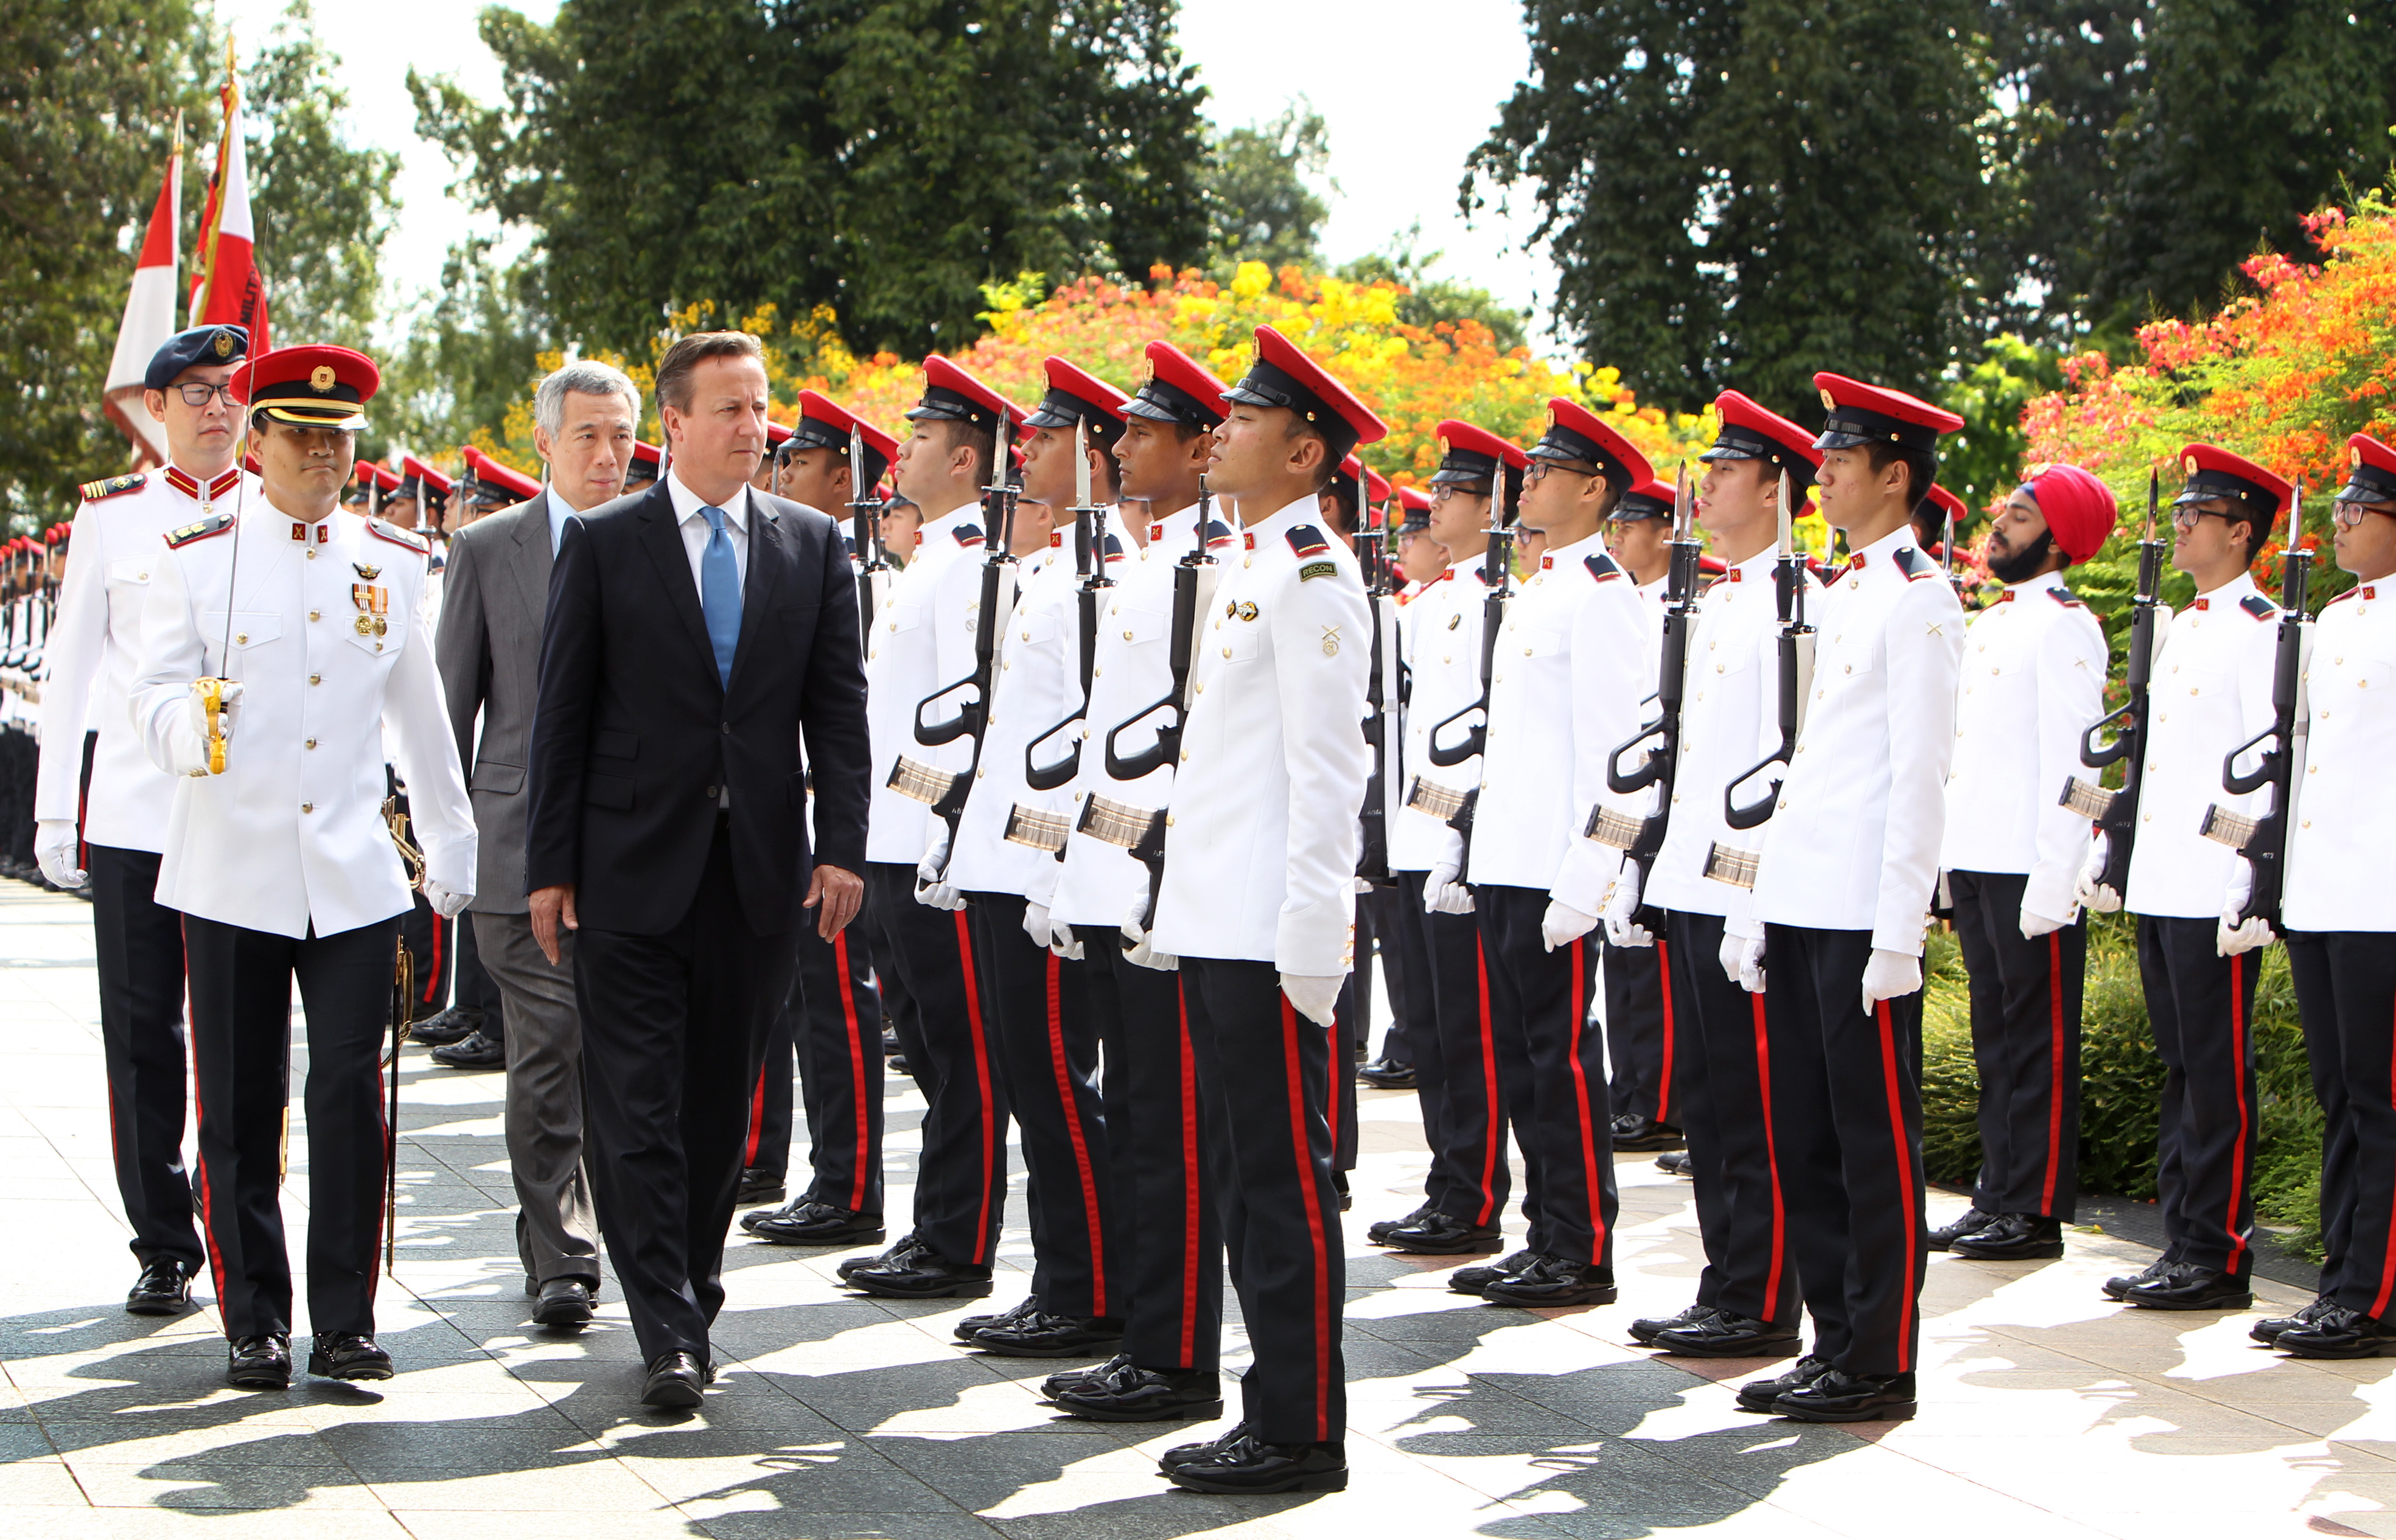 Visit by UK Prime Minister David Cameron - Jul 2015 (MCI Photo by Chwee)